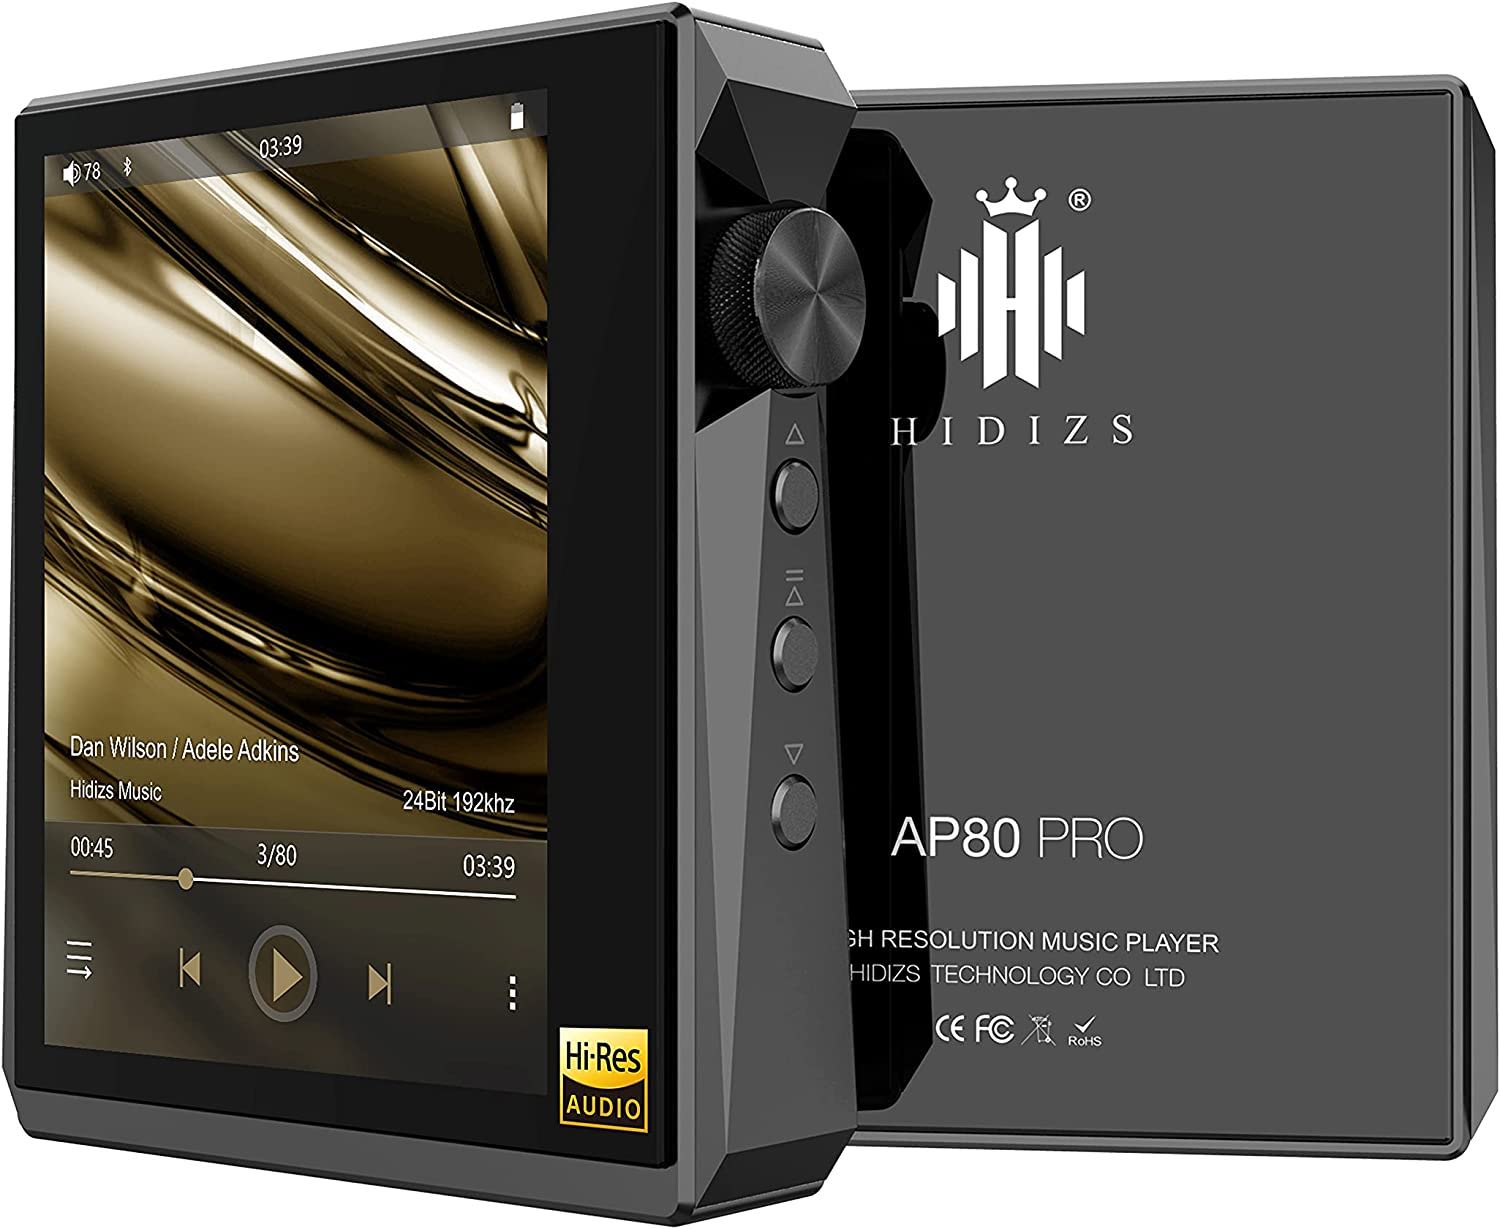 Hidizs Ap80 pro used as fixed battery  dac/ bank /eq.